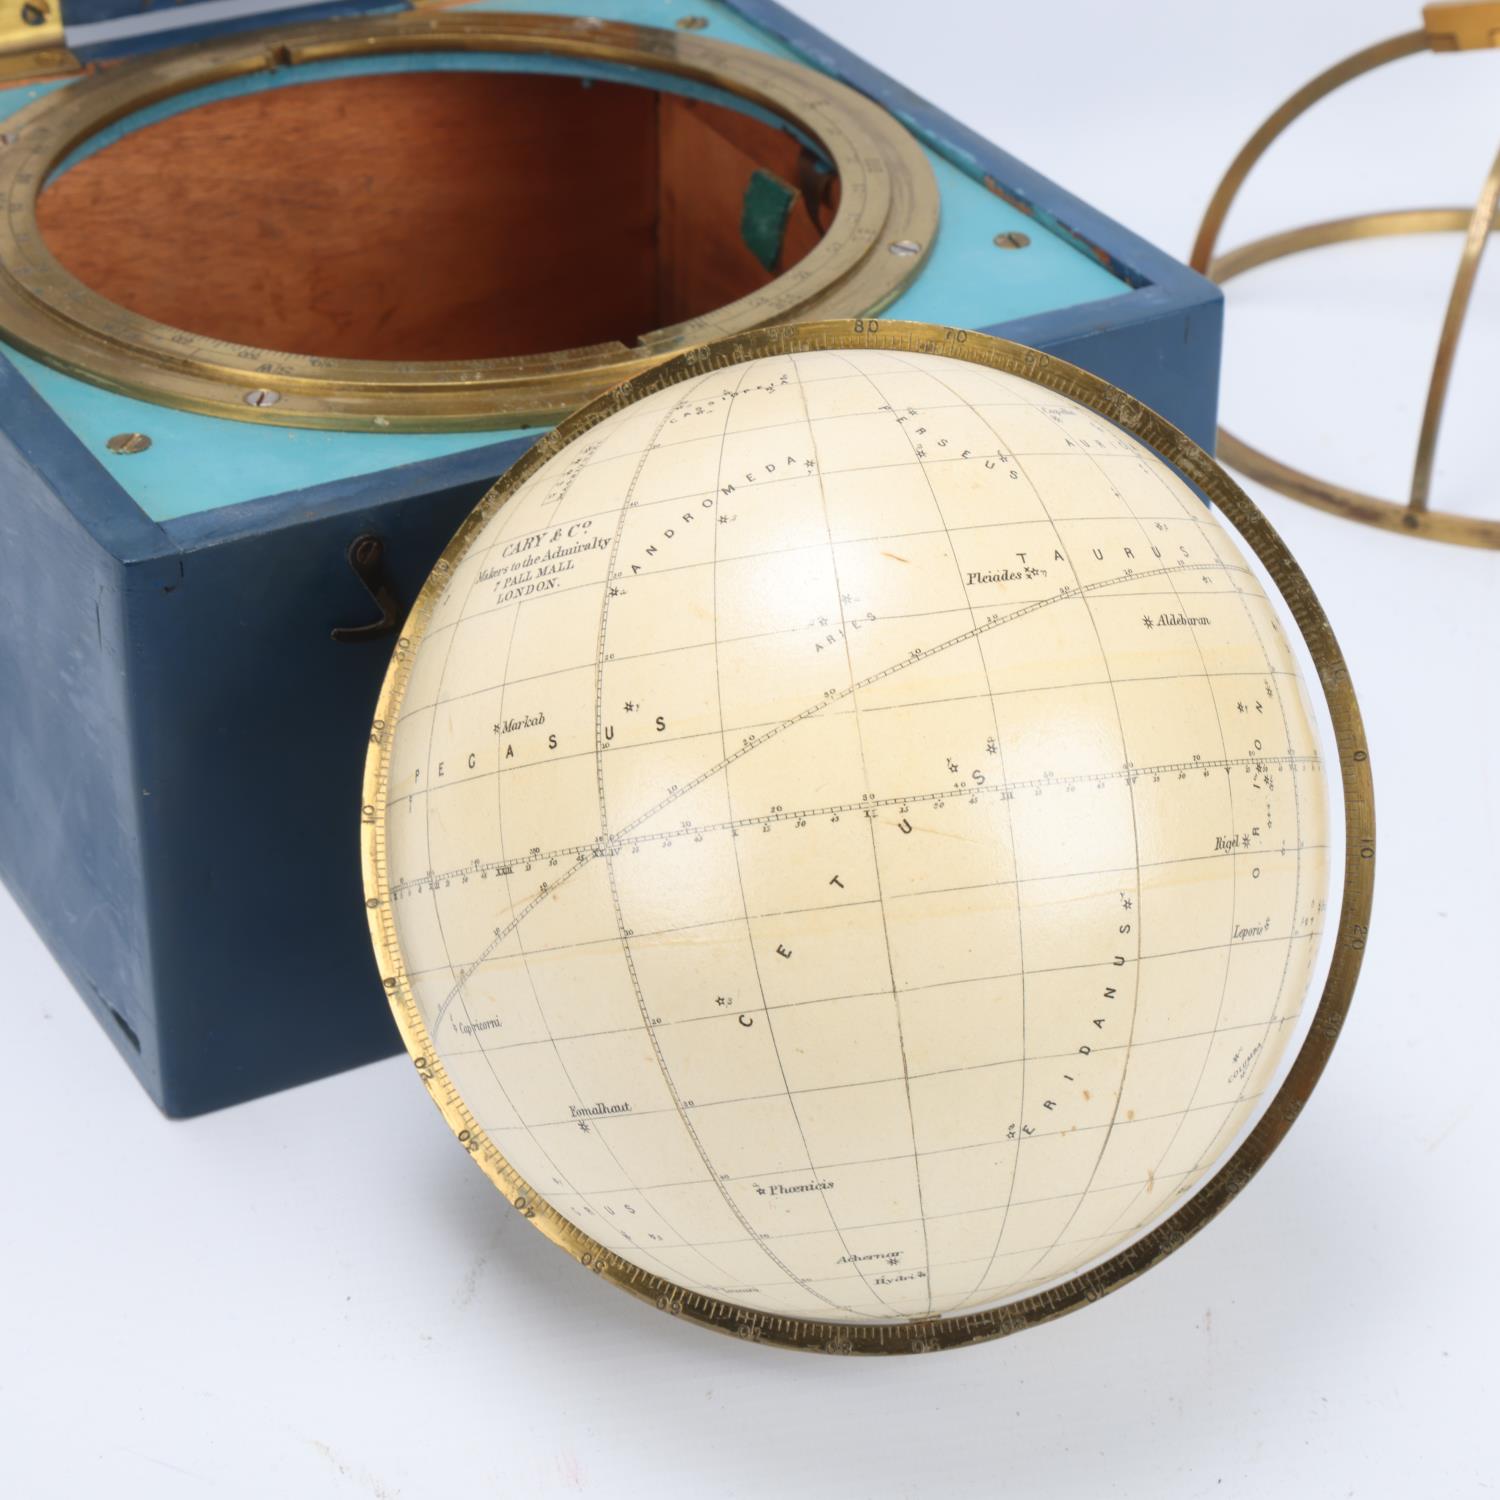 A starglobe, by Cary of London, brass-mounted and in original painted wooden case, patent no. 21540, - Image 2 of 3